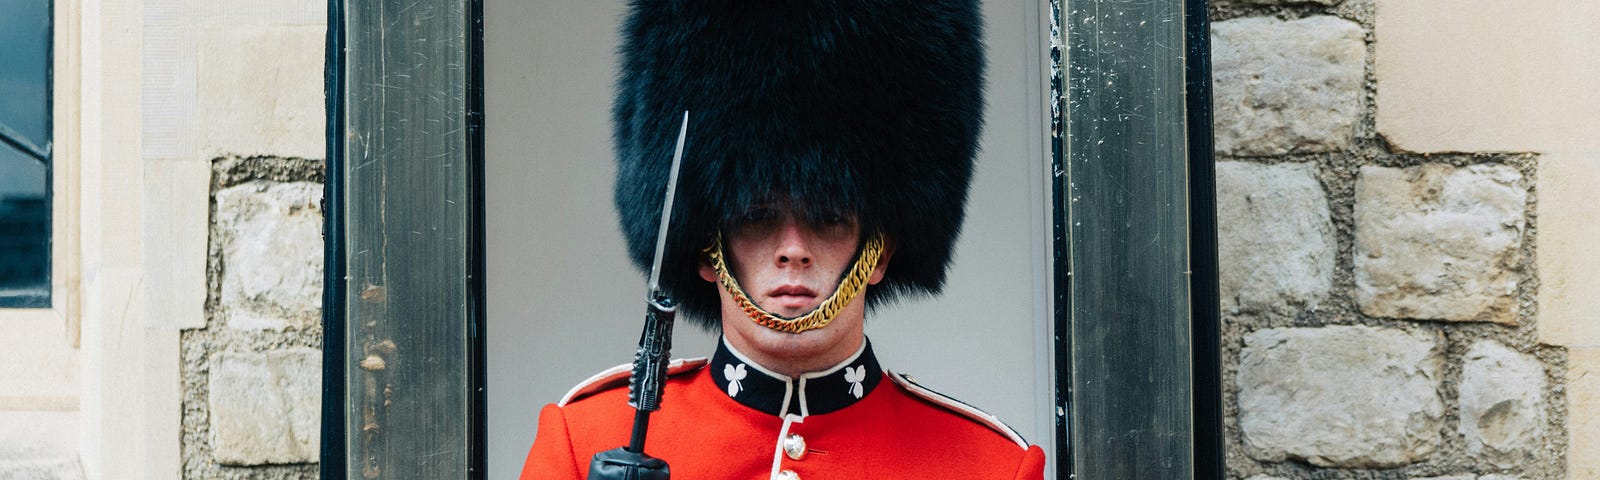 British Royal Guard in Busby standing at attention at Buckingham Palace.